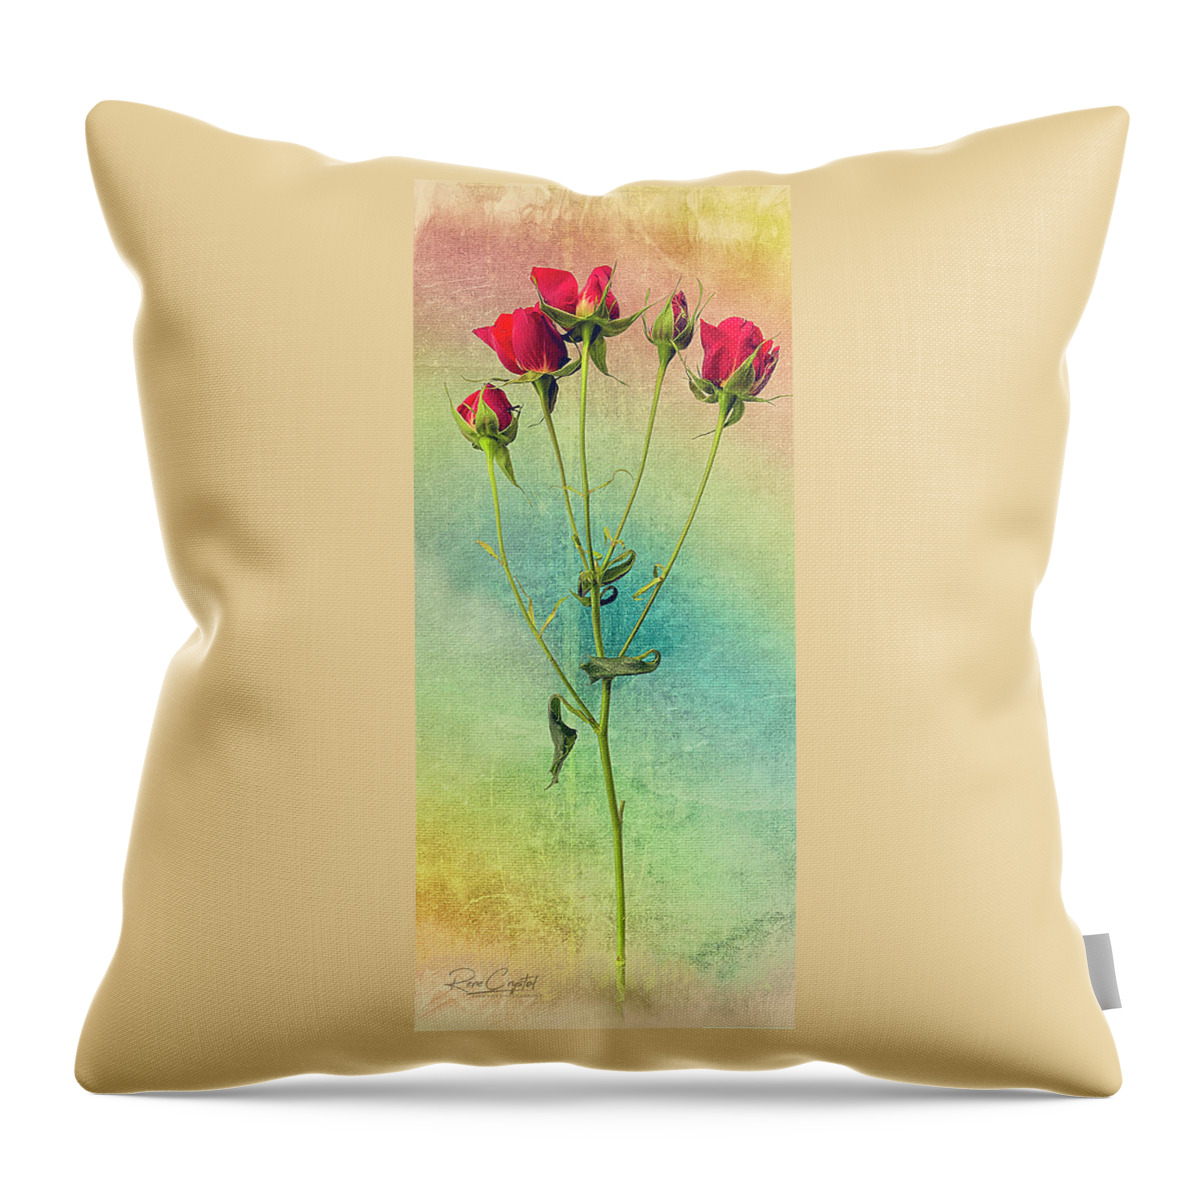 Roses Throw Pillow featuring the photograph These Roses Are For You by Rene Crystal